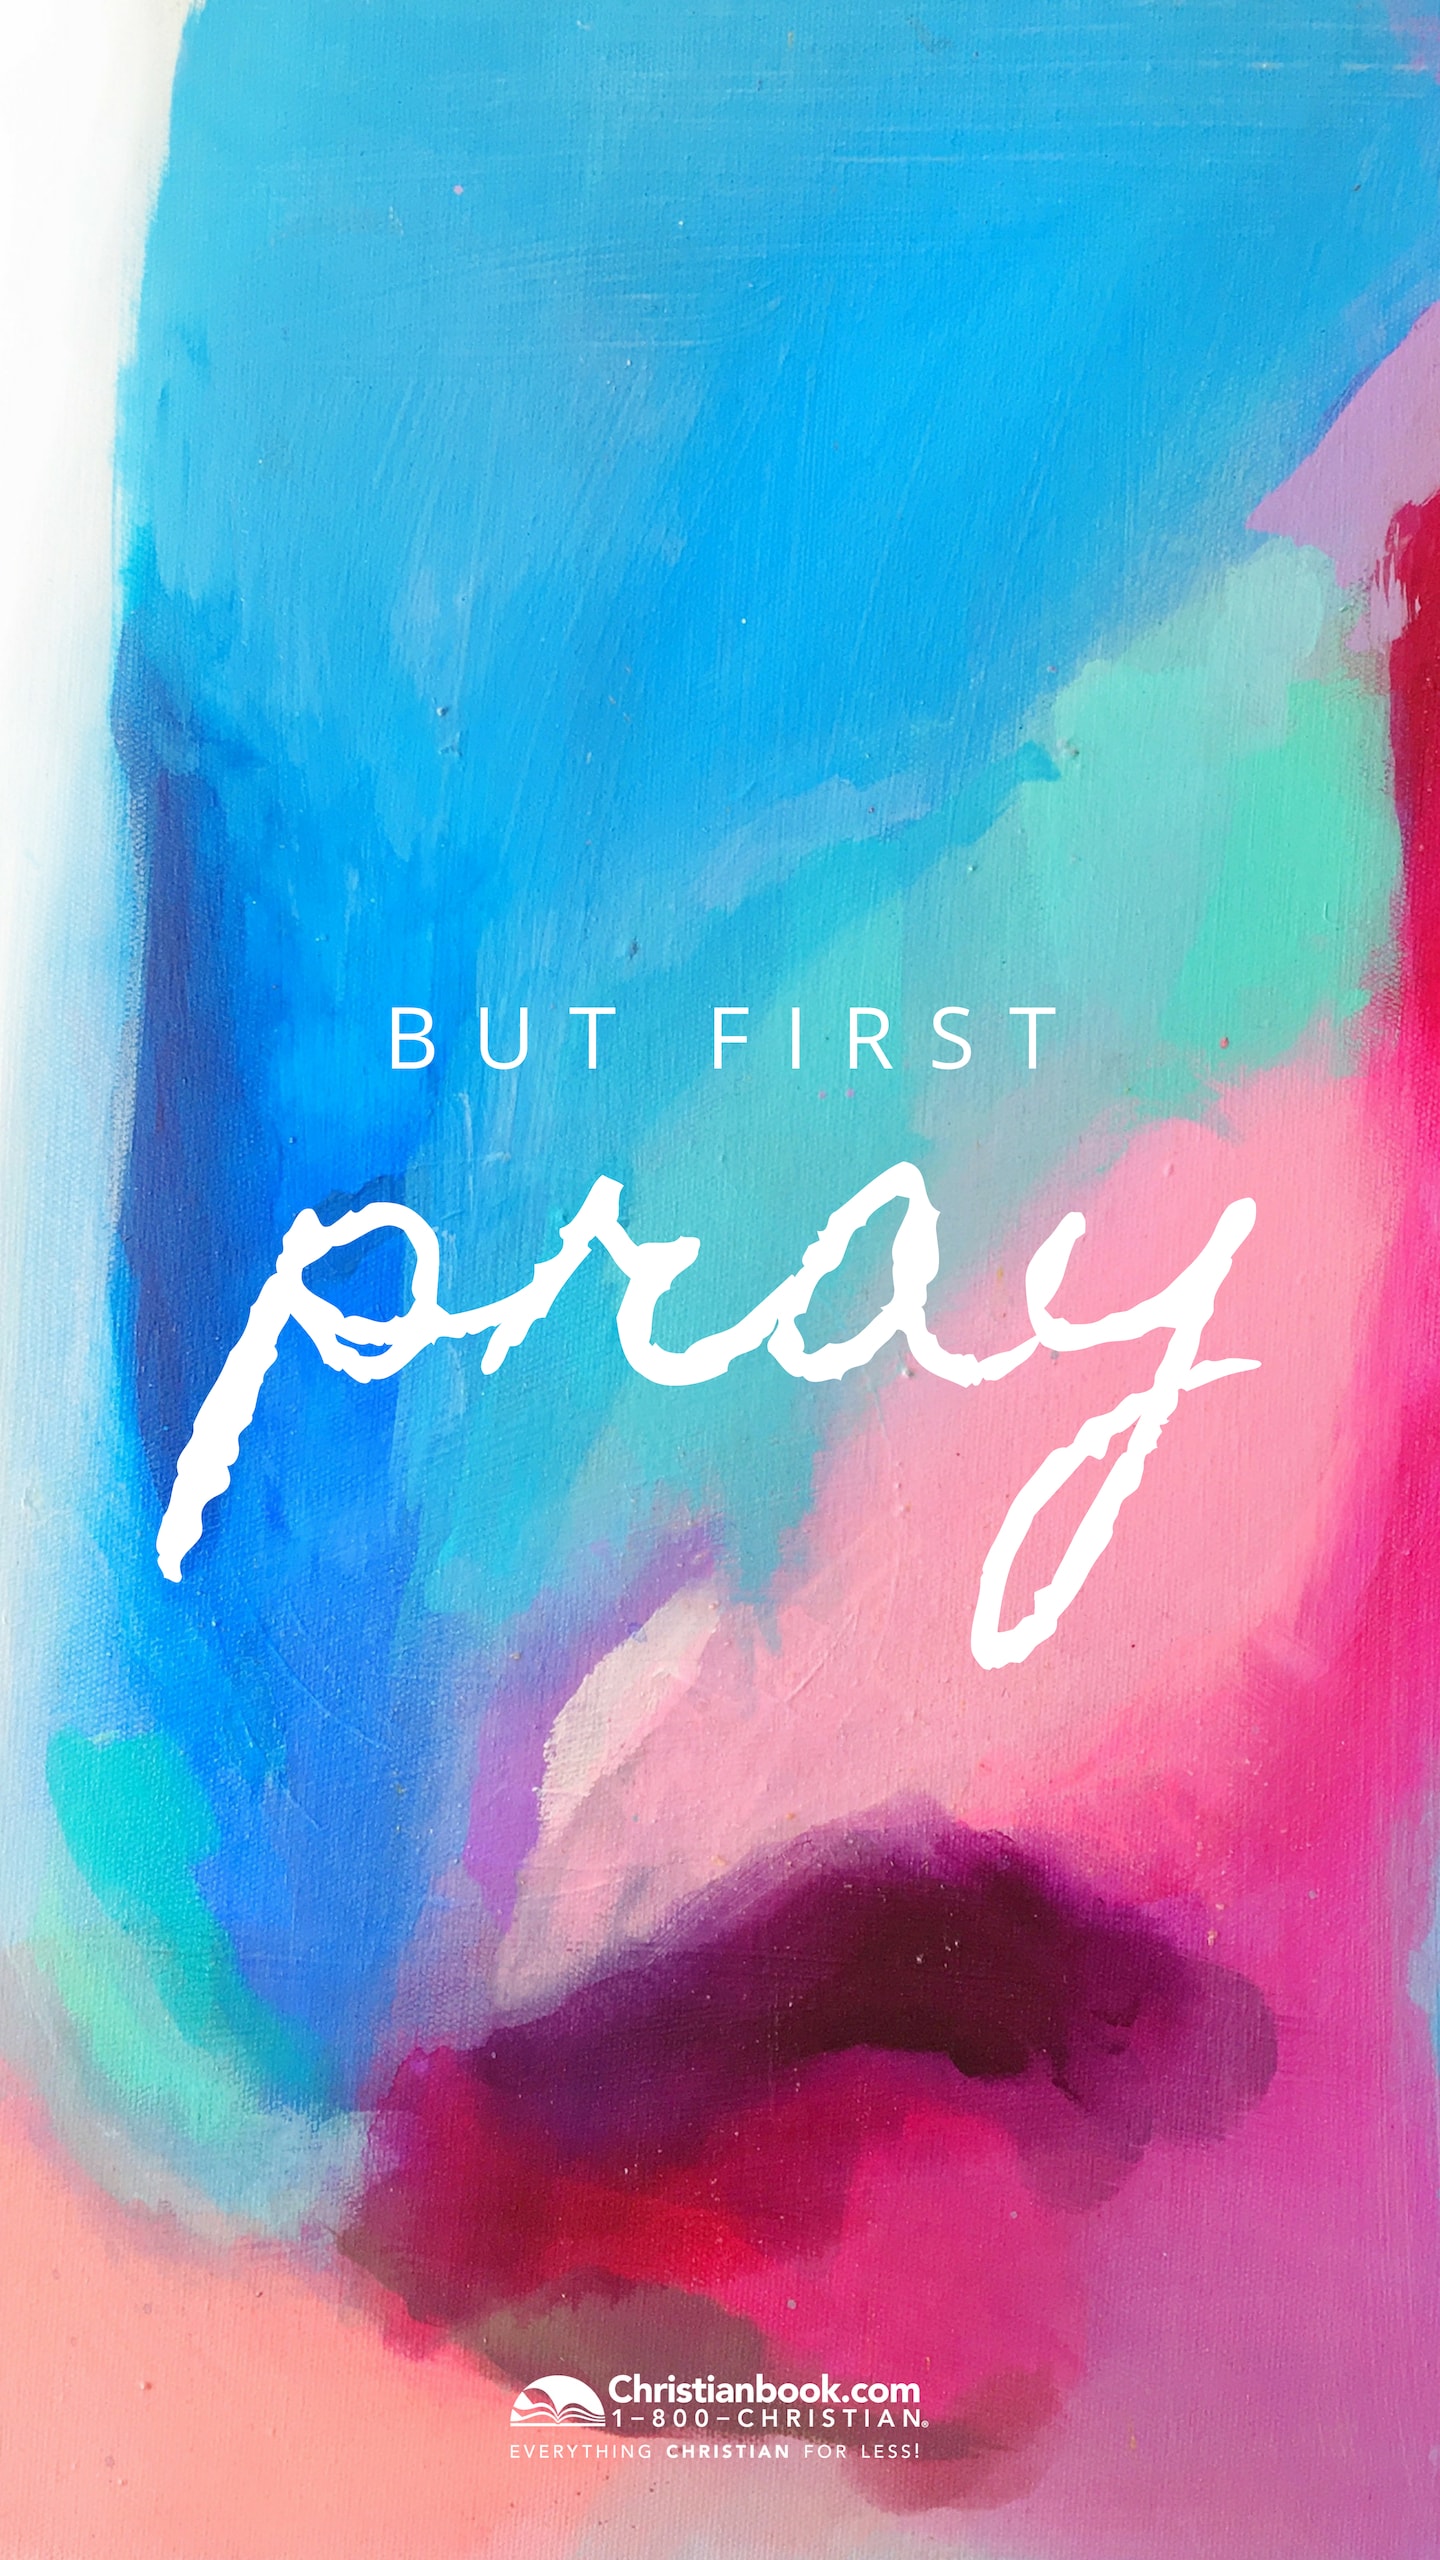 first iphone wallpaper,blue,text,turquoise,pink,font